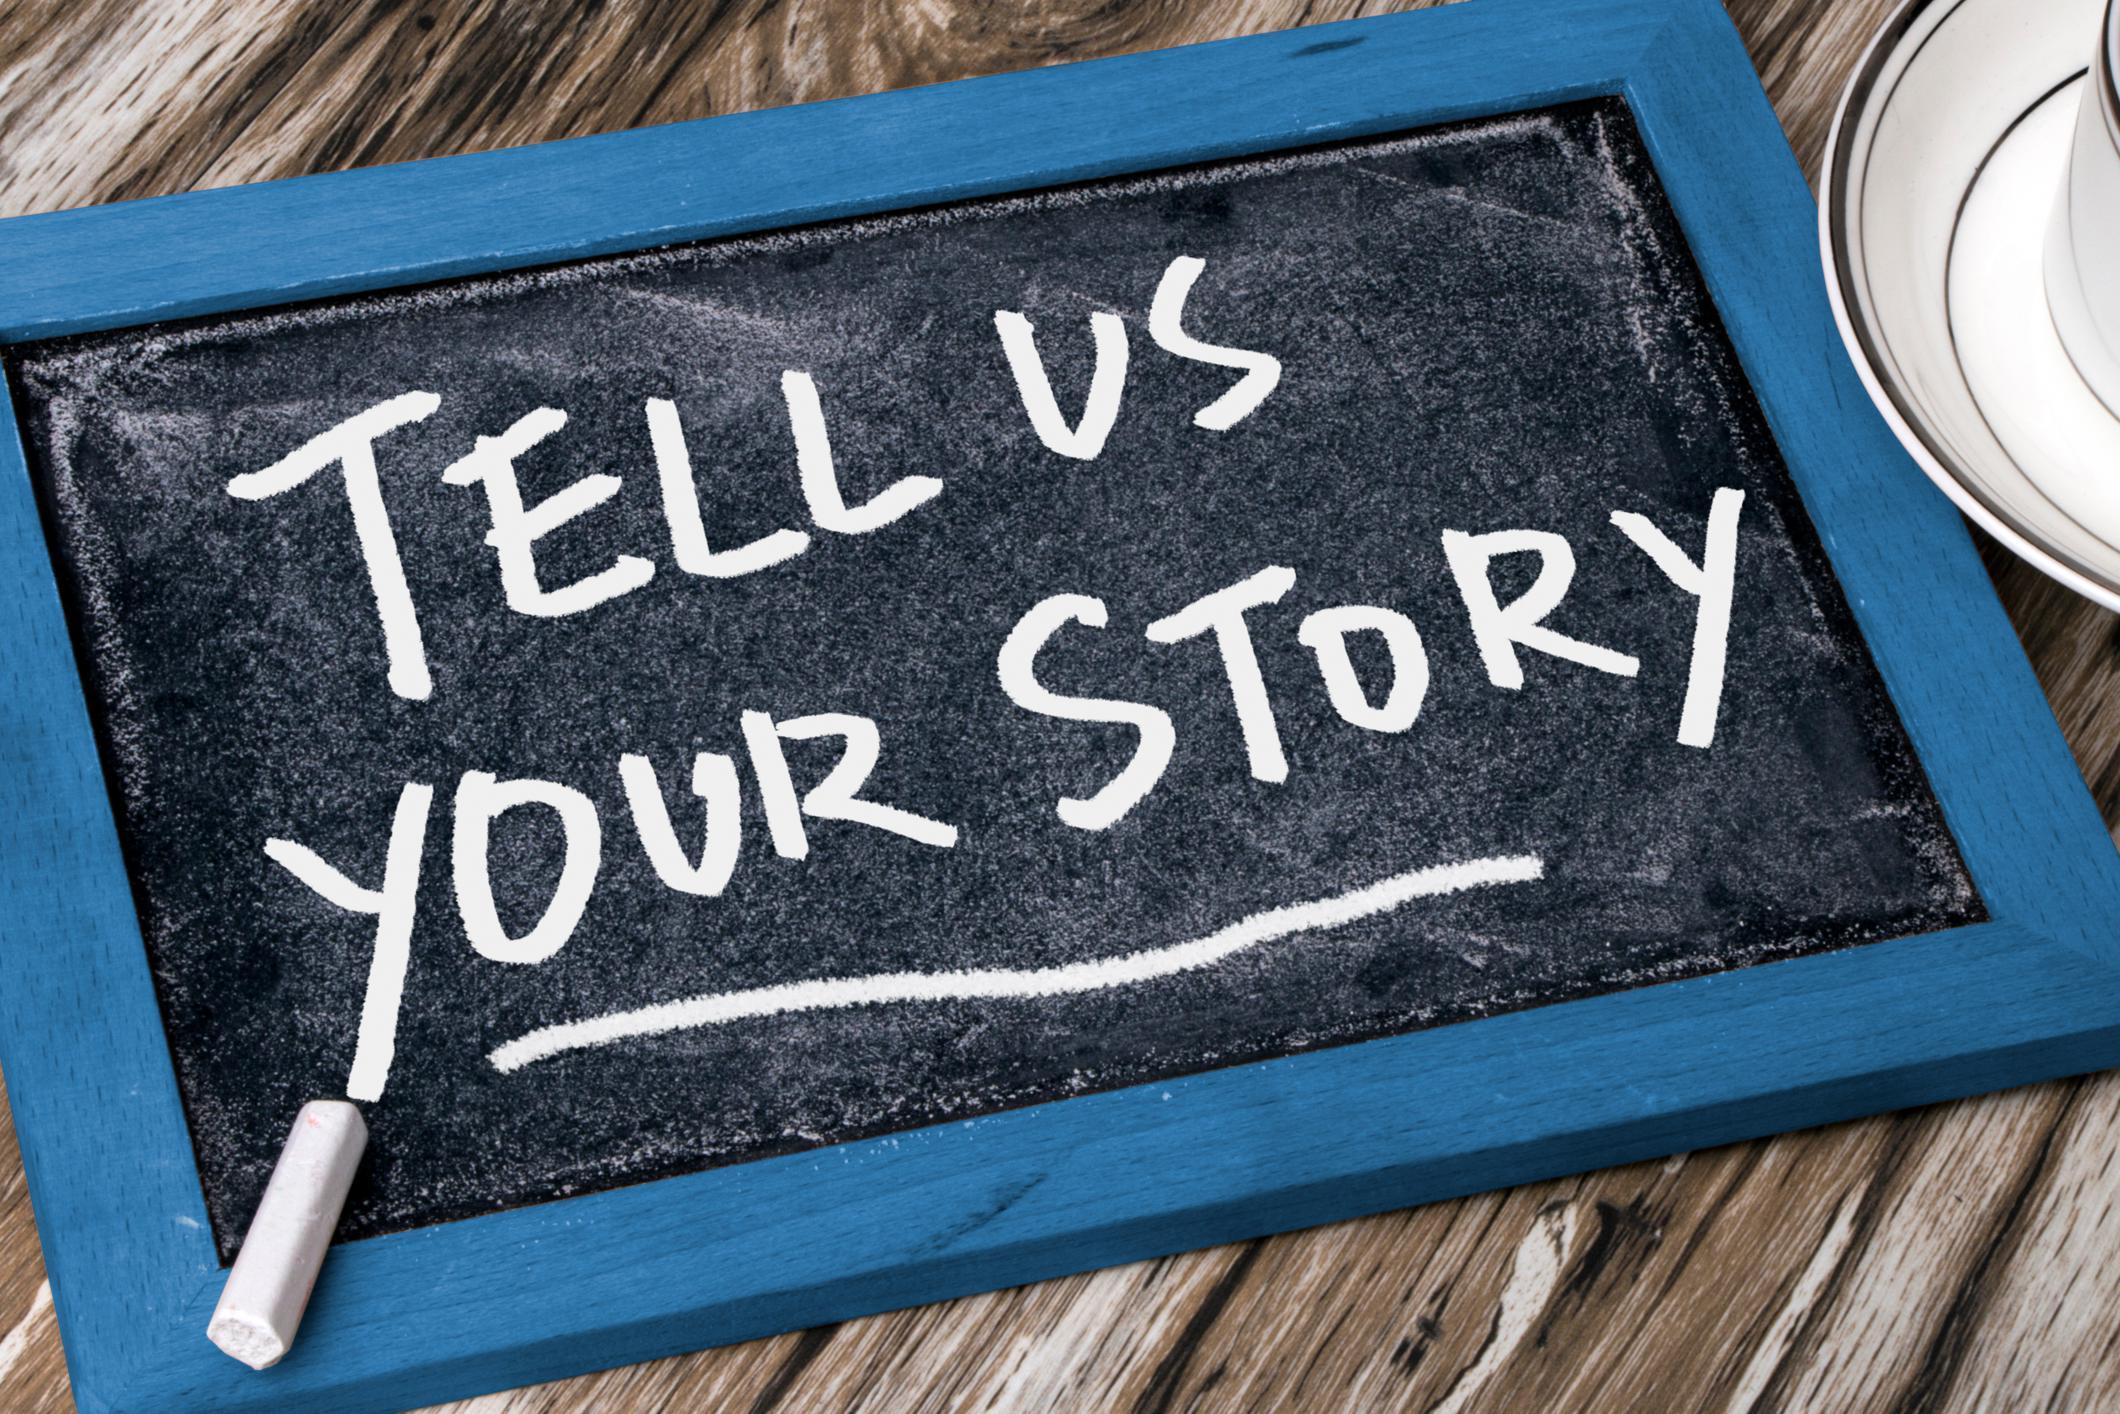 "tell us your story" written on a chalkboard